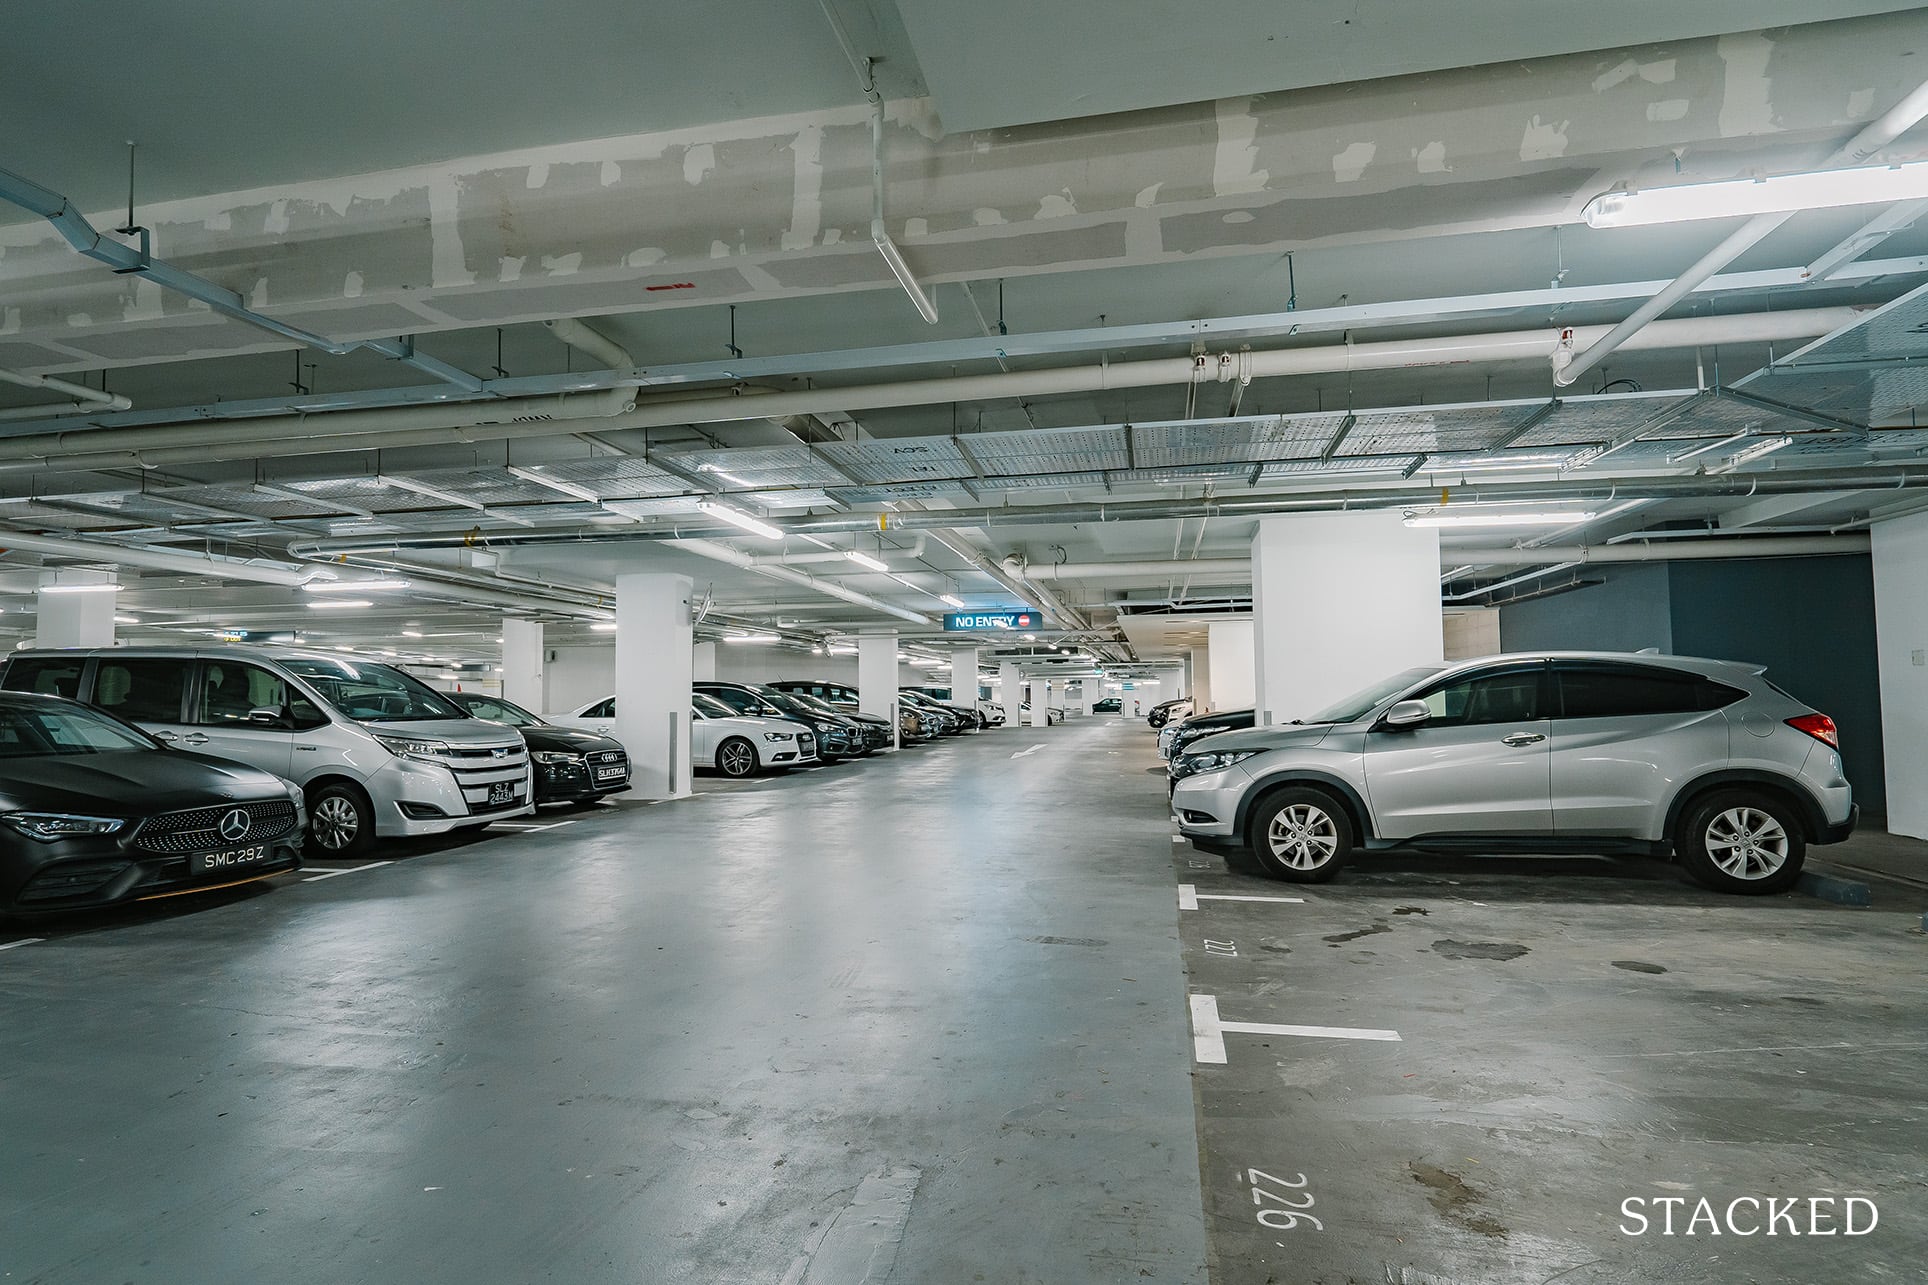 The Stirling Residences parking